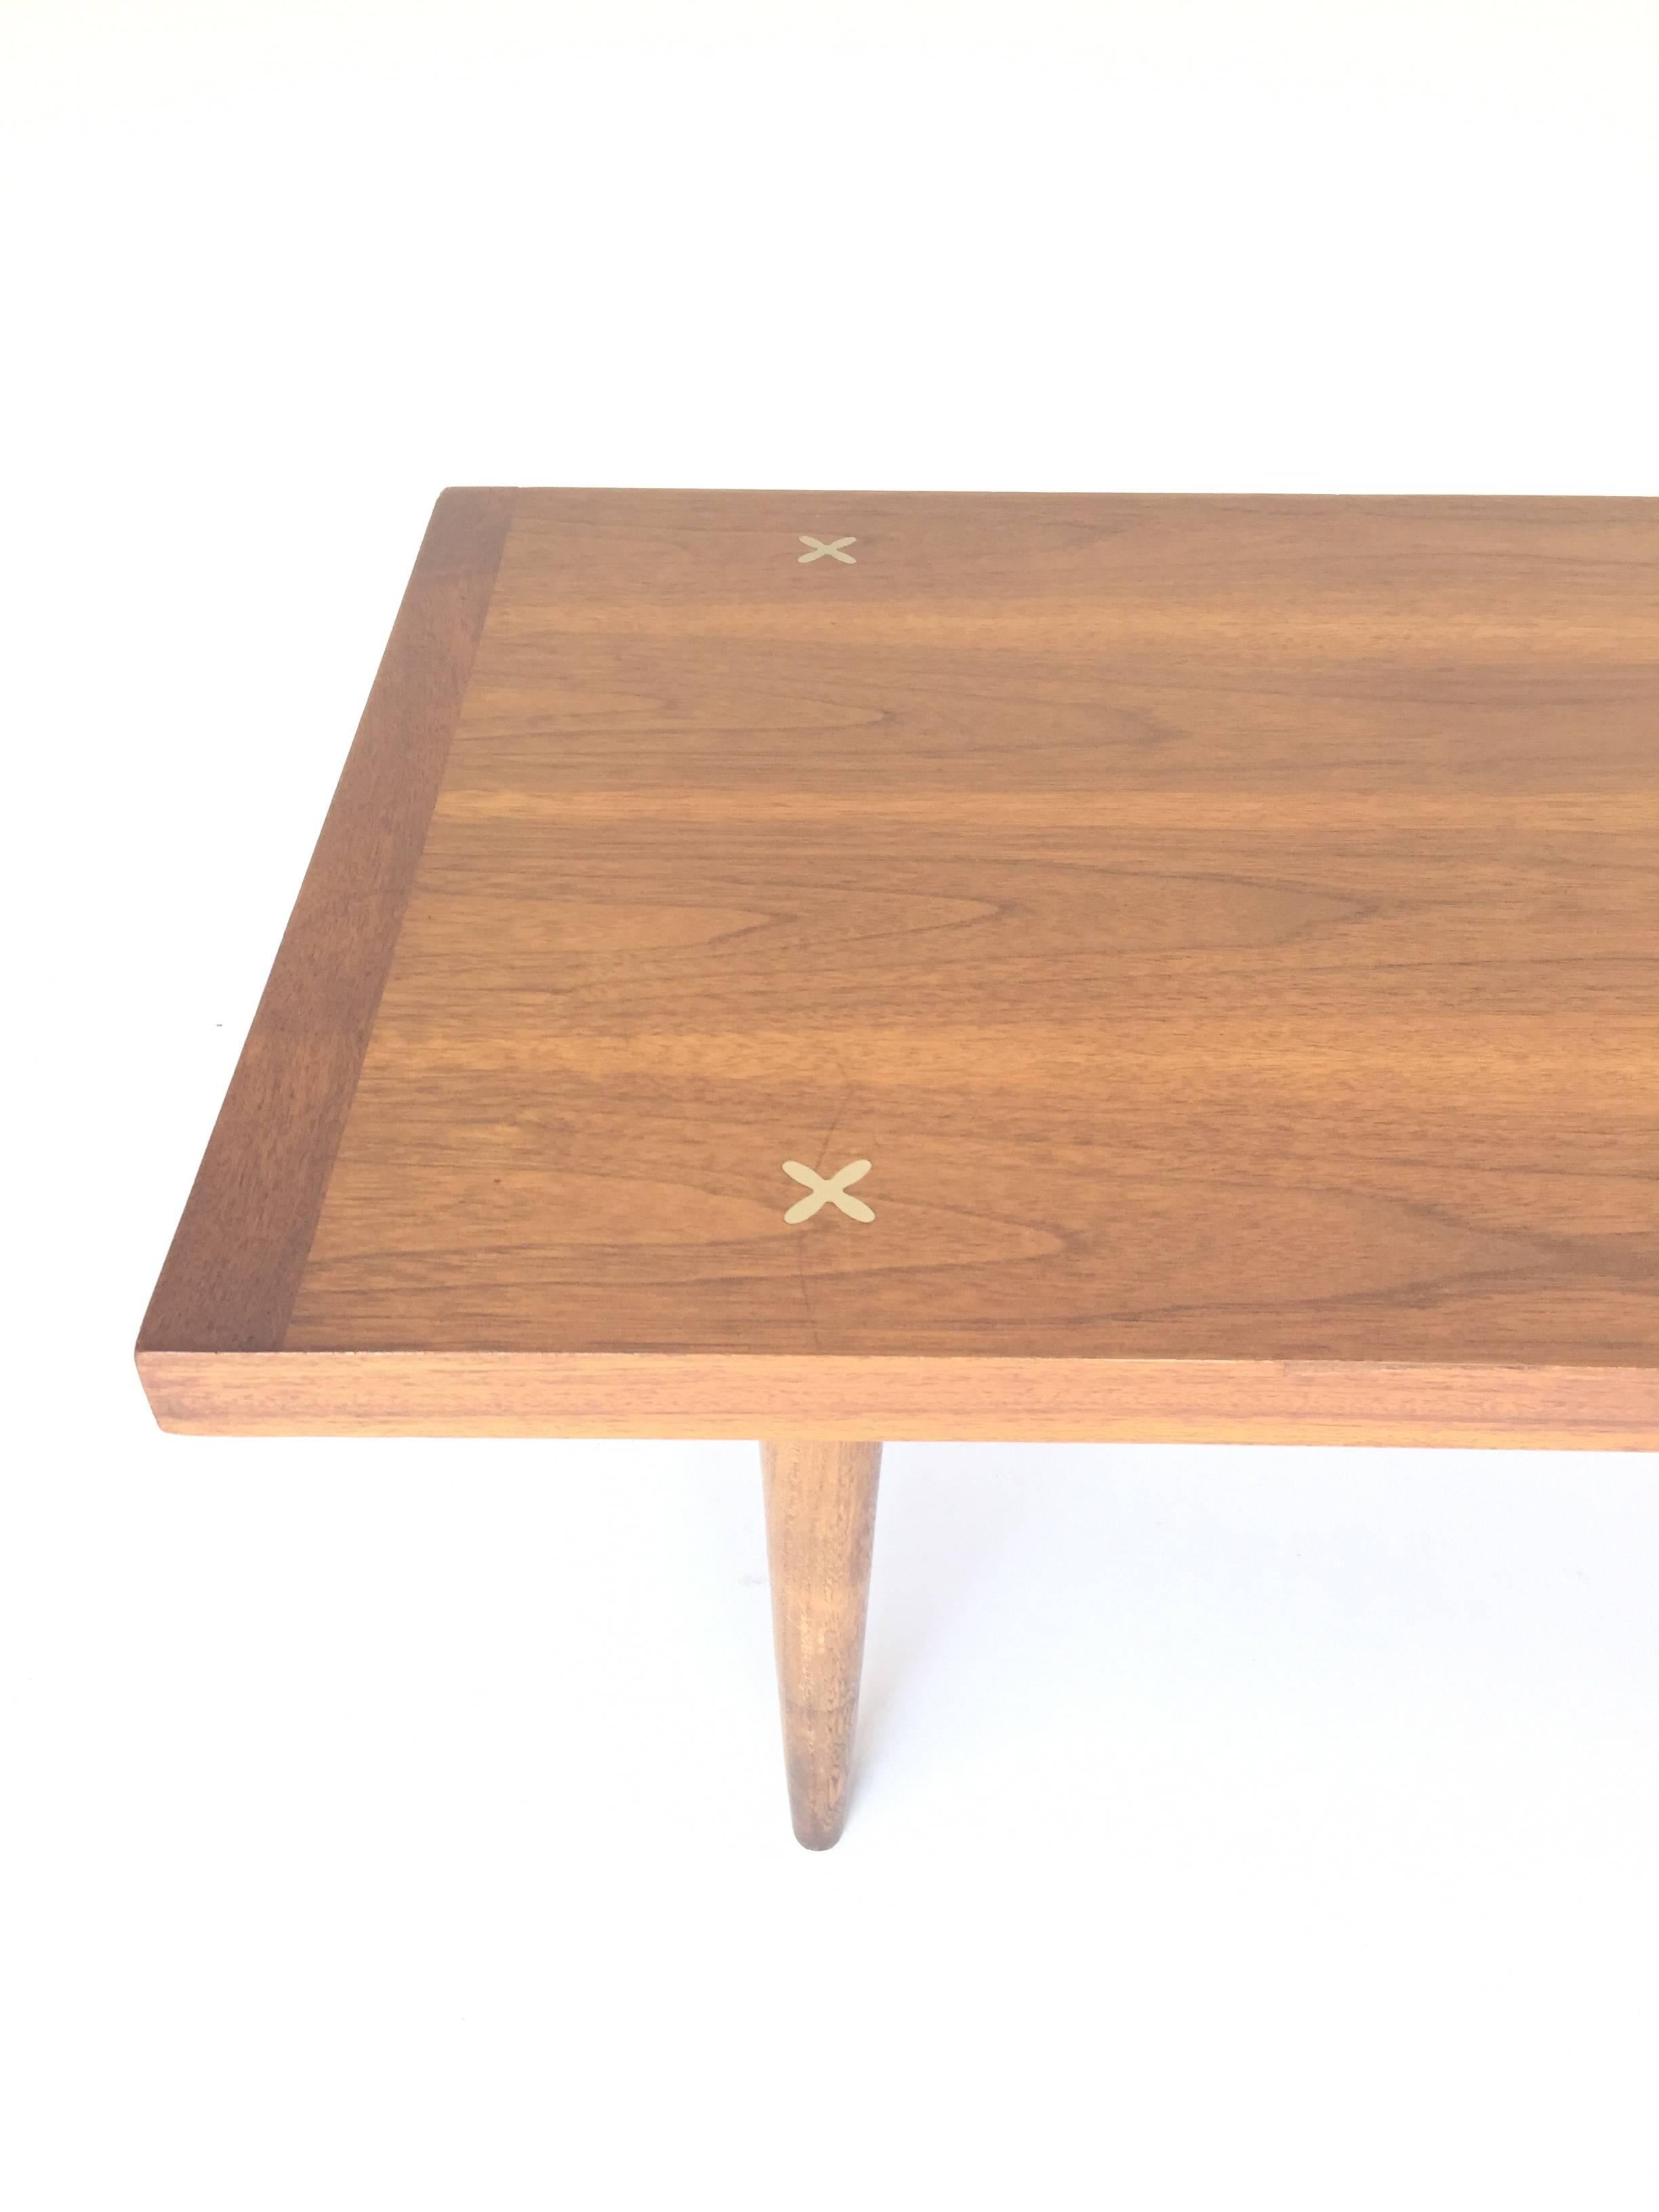 Stylish Mid-Century Modern coffee table by American of Martinsville. Recently refinished walnut grain looks incredible. Features unique X-shaped ornamental inlays in brushed aluminium.